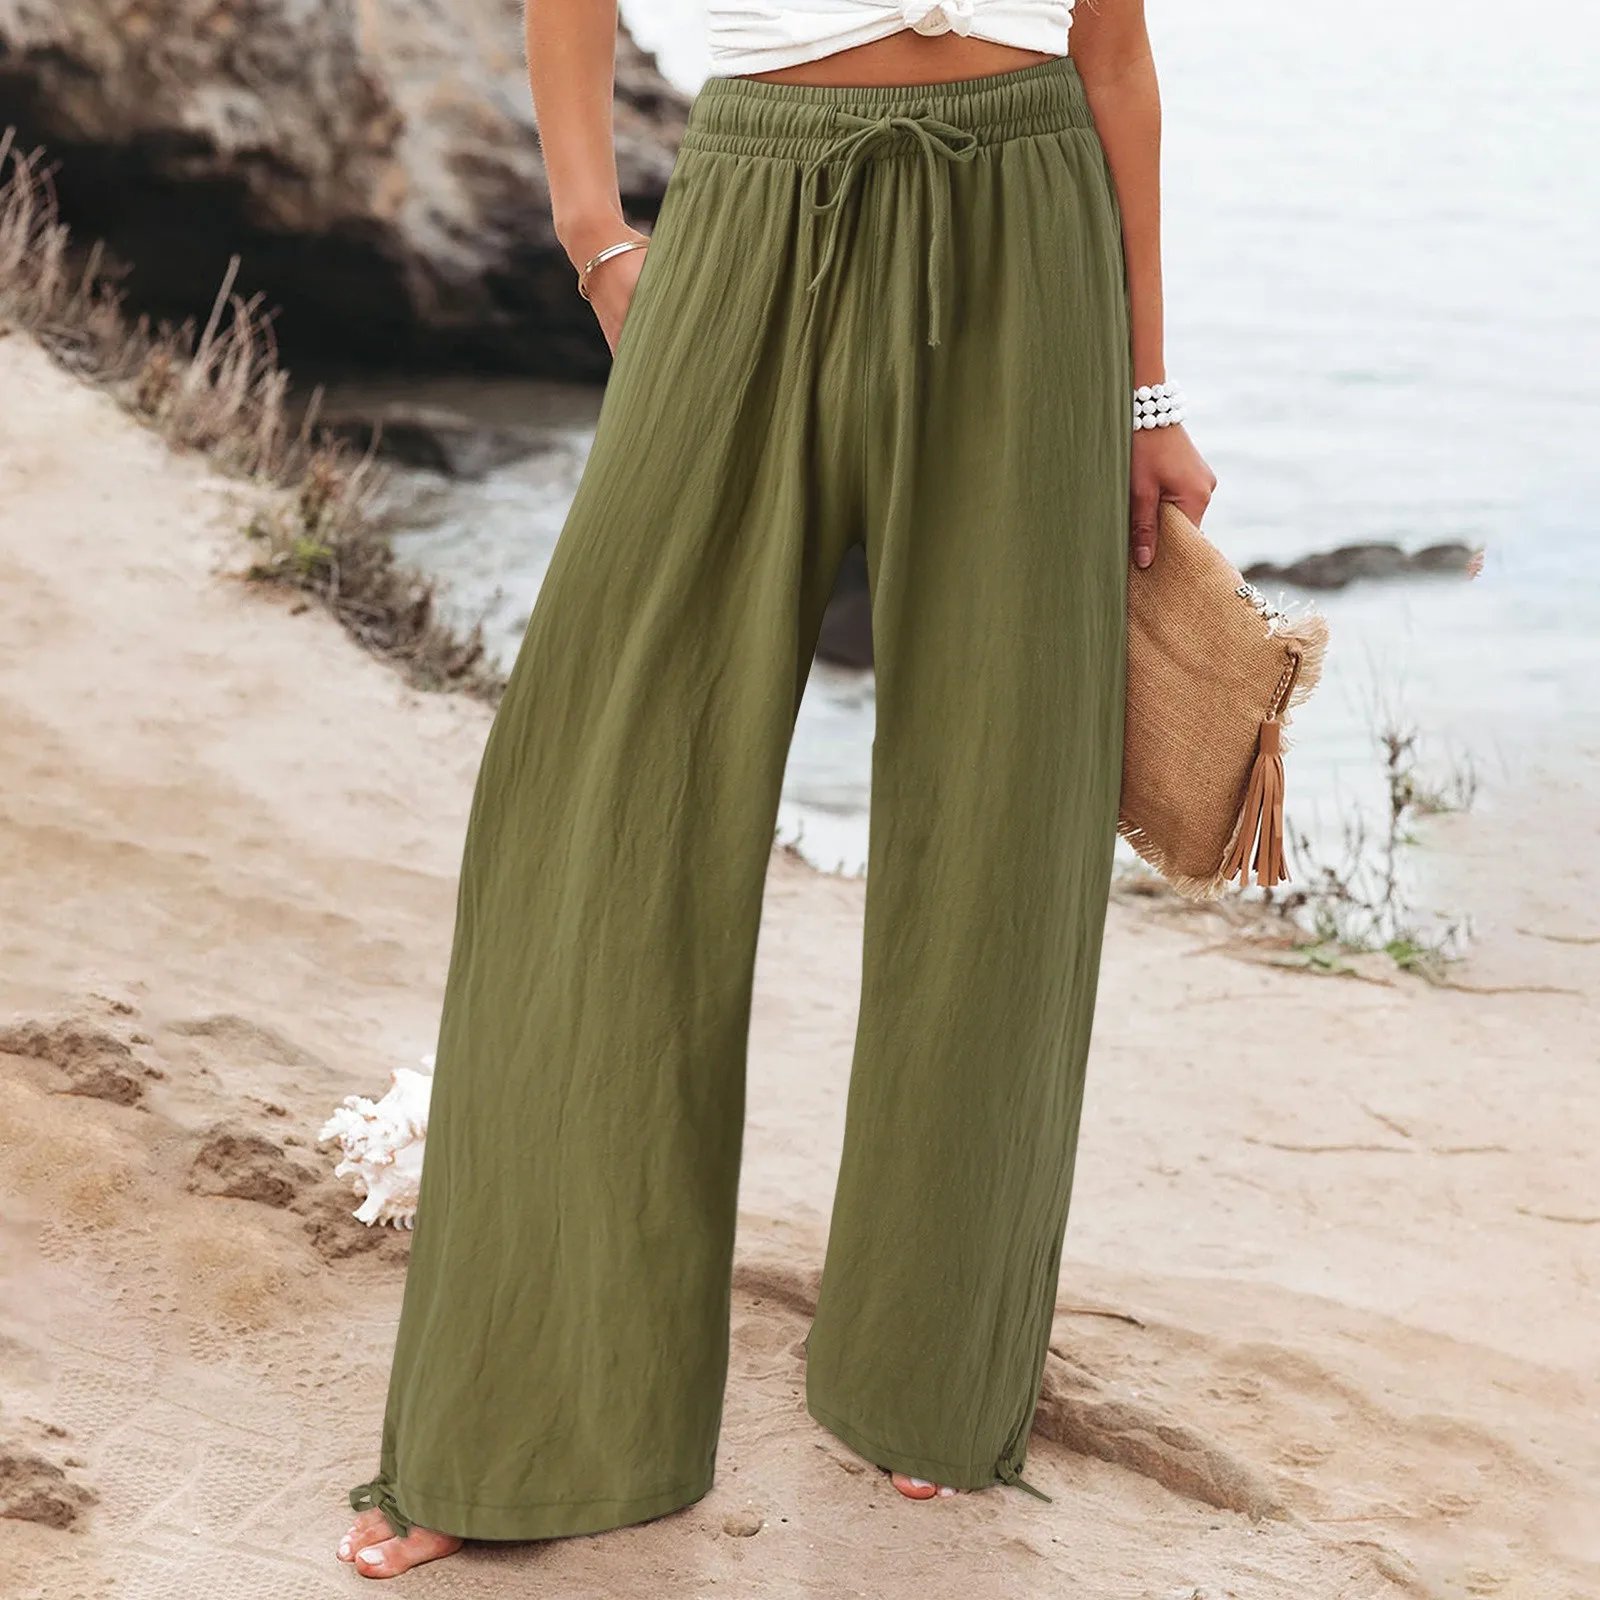 Summer And Autumn Women Cotton Line Casual Loose Pants Fashion Drawstring Elastic High Waist Pants Wide Leg Pants With Pockets